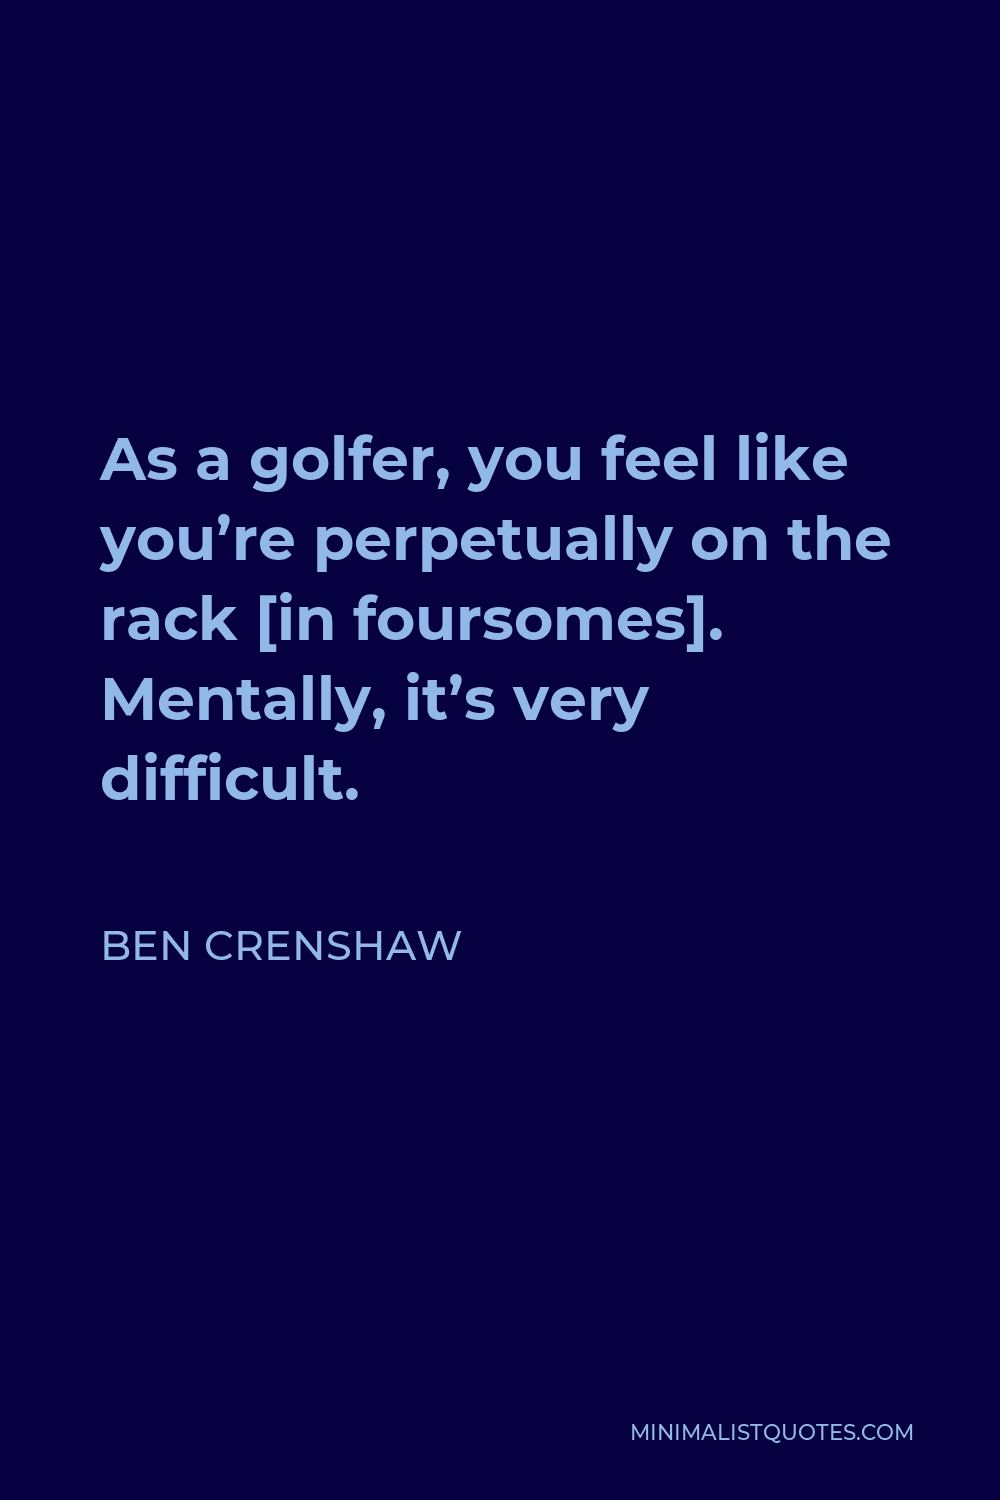 Ben Crenshaw Quote - As a golfer, you feel like you’re perpetually on the rack [in foursomes]. Mentally, it’s very difficult.